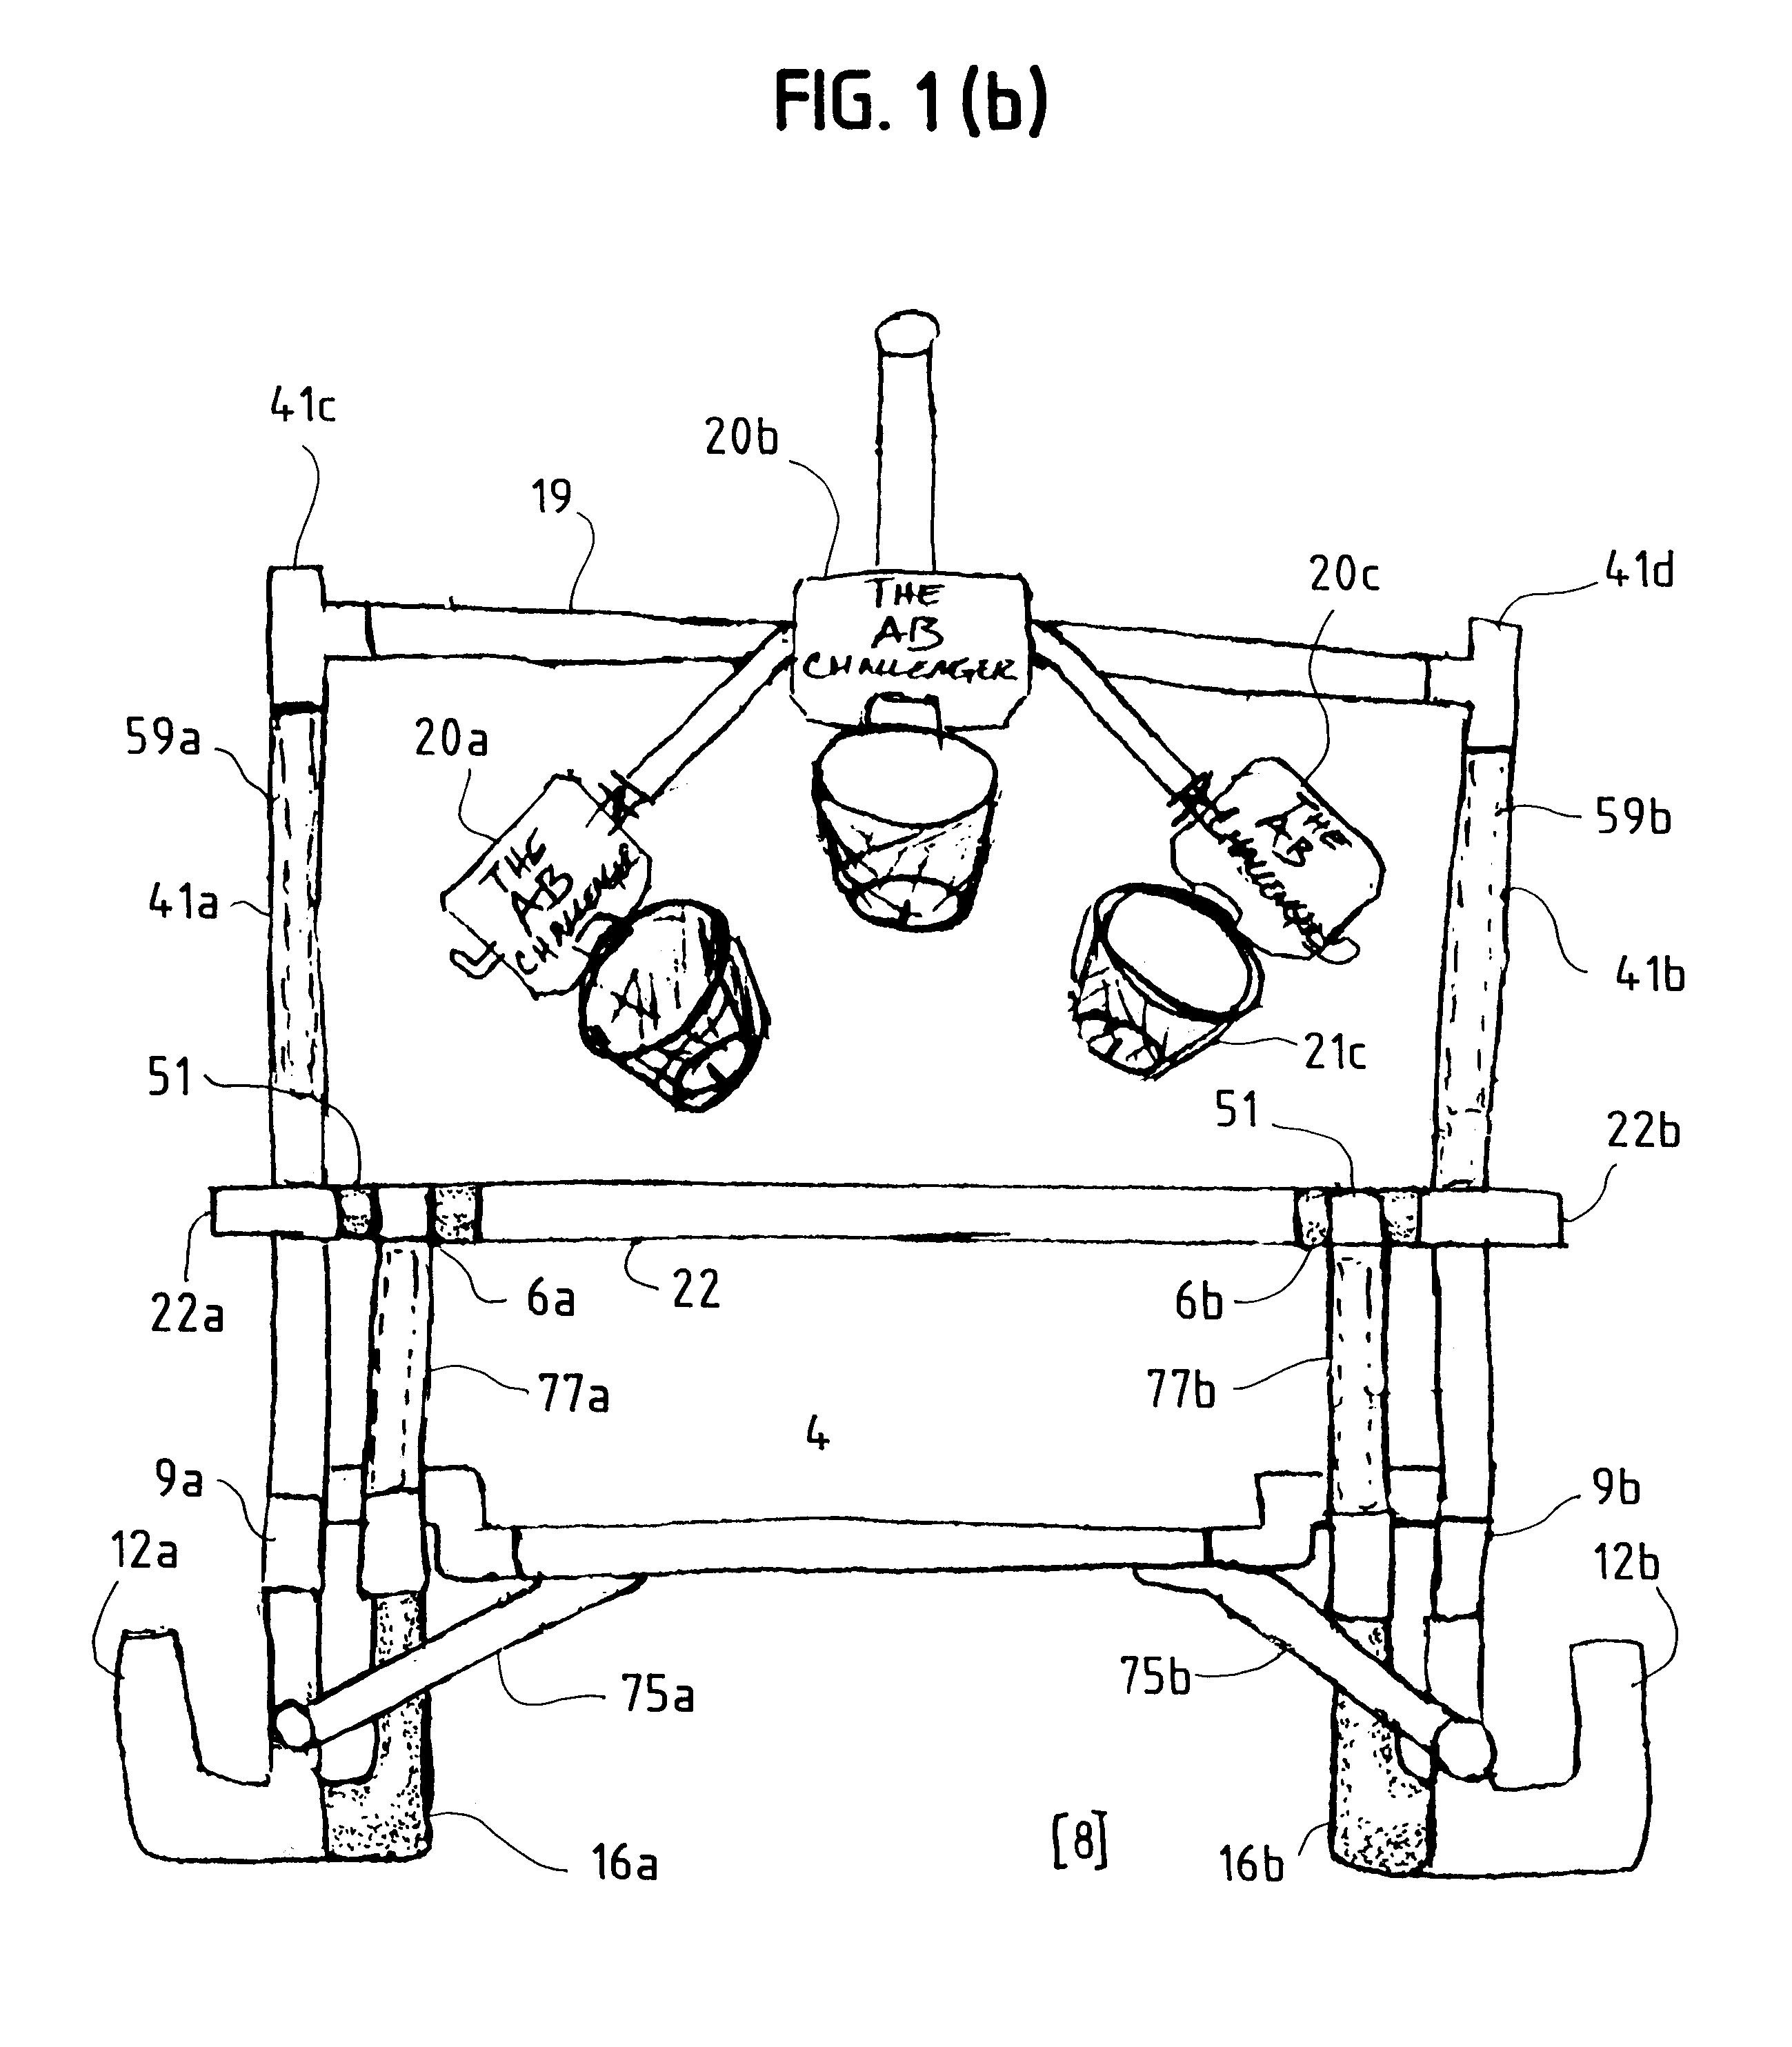 AB challenger exercise apparatus